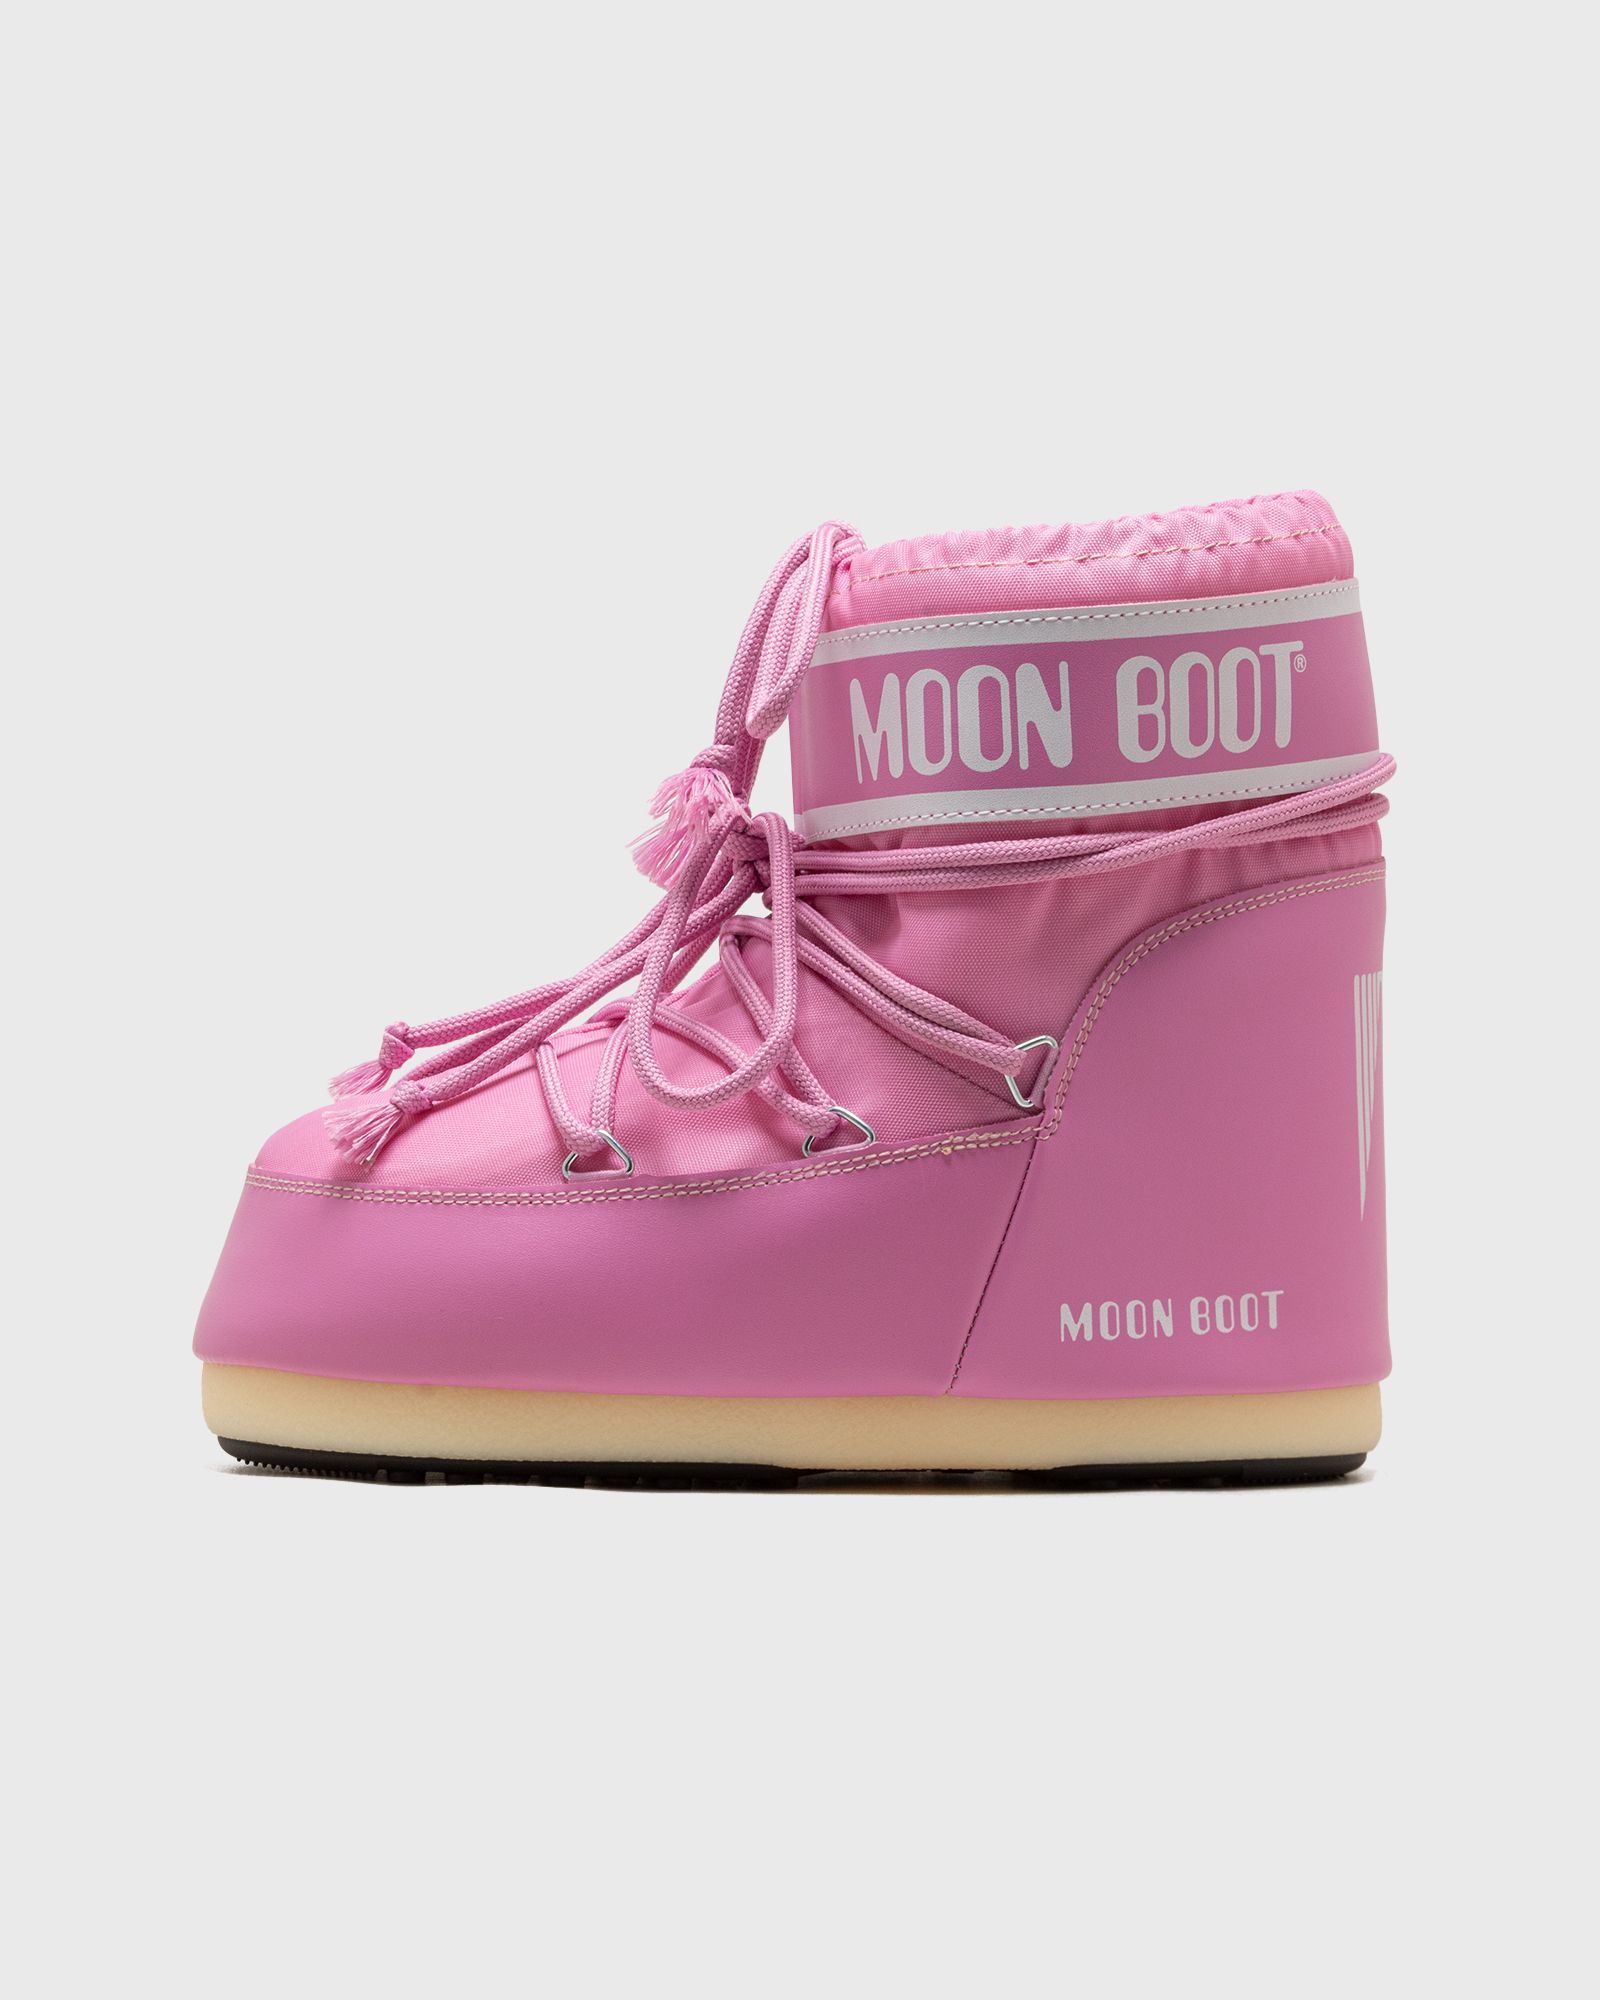 Moon Boot - icon low nylon men boots pink in größe:42-44